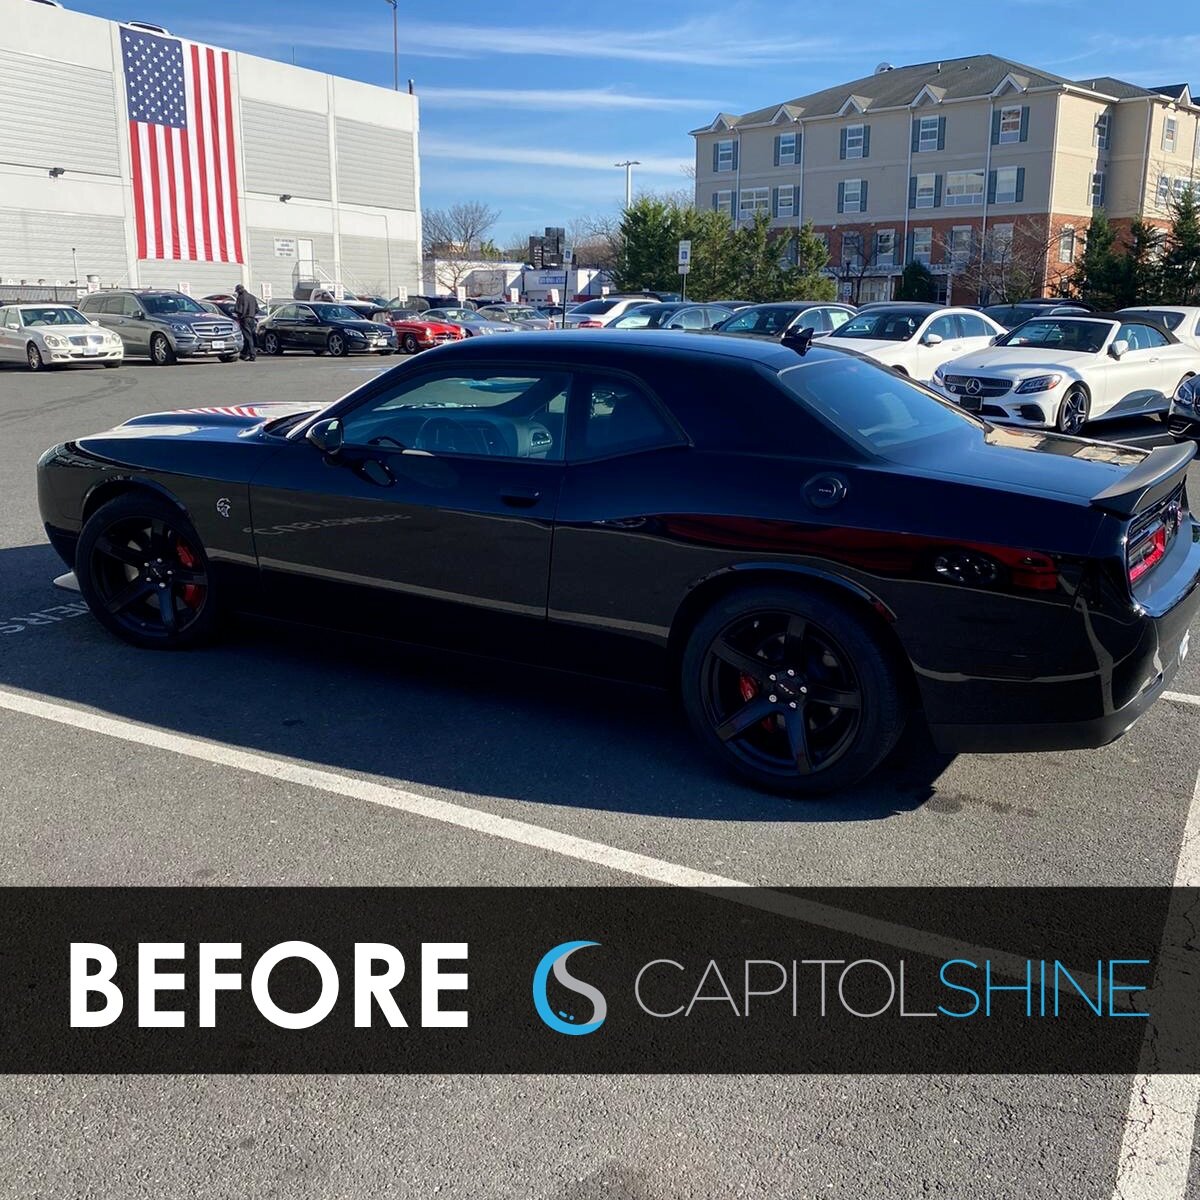 Paint Protection Film (PPF) Explained  Capitol Shine — Capitol Shine  Washington DC Paint Protection Film and Ceramic Coatings